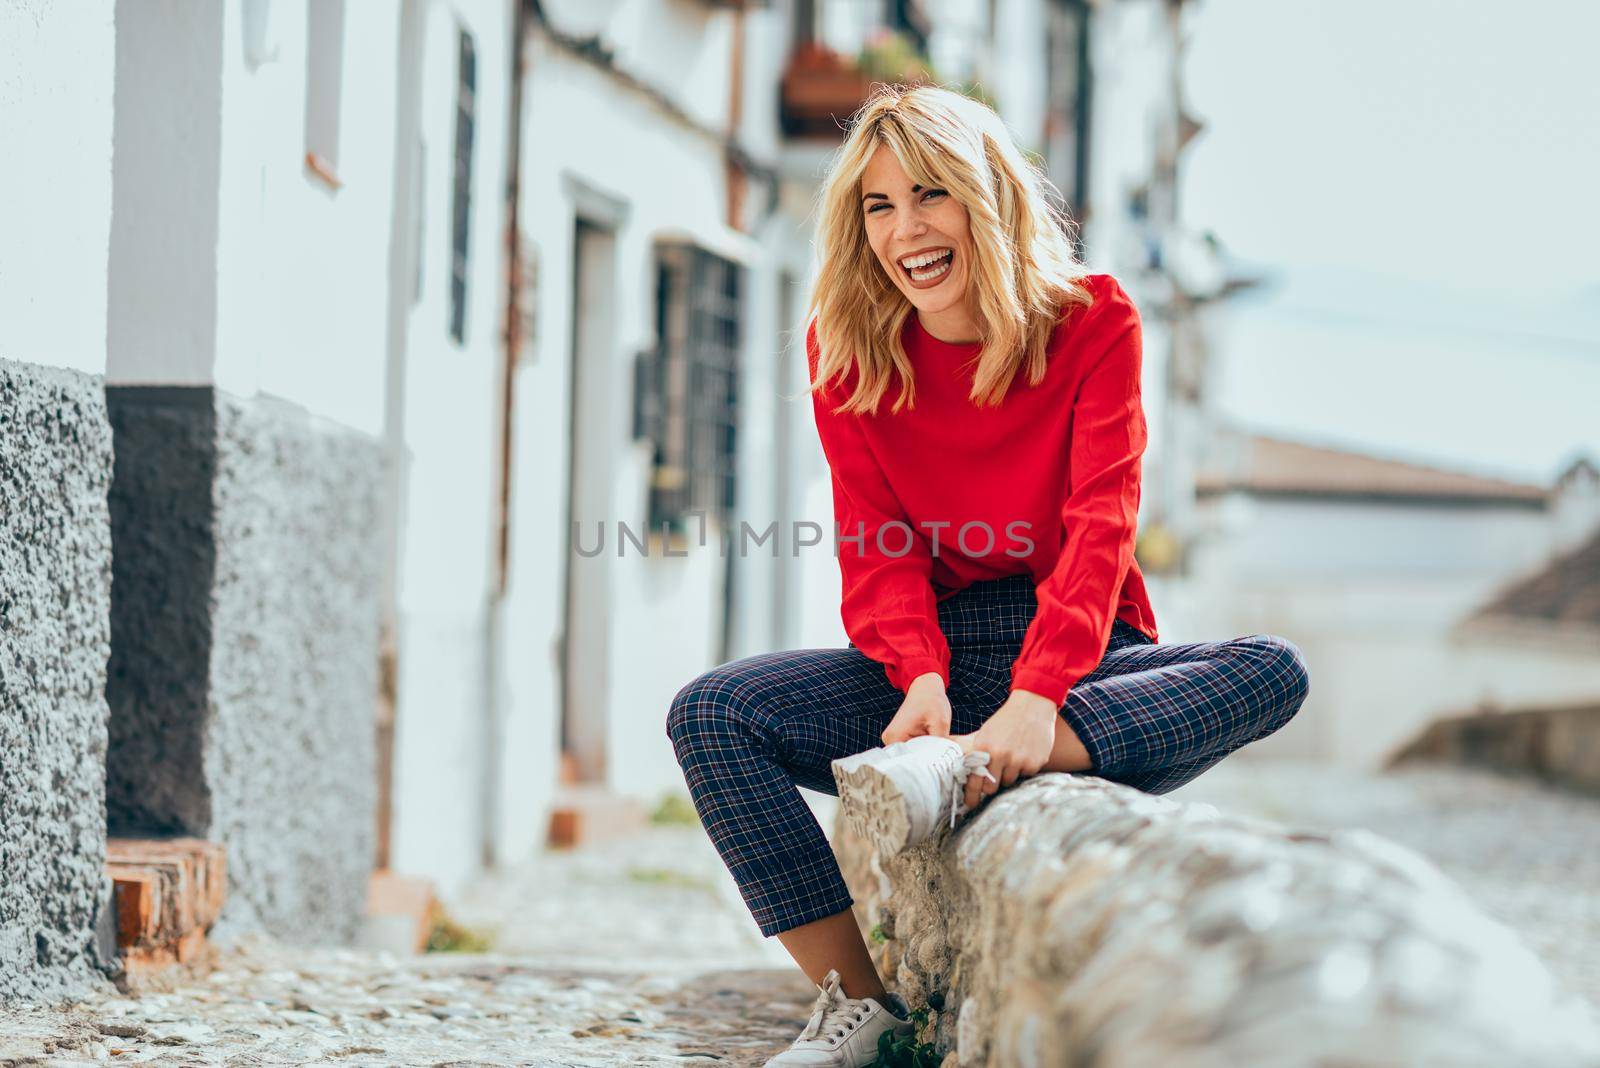 Happy young blond woman sitting on urban background. Laughing blonde girl with red shirt enjoying life outdoors.